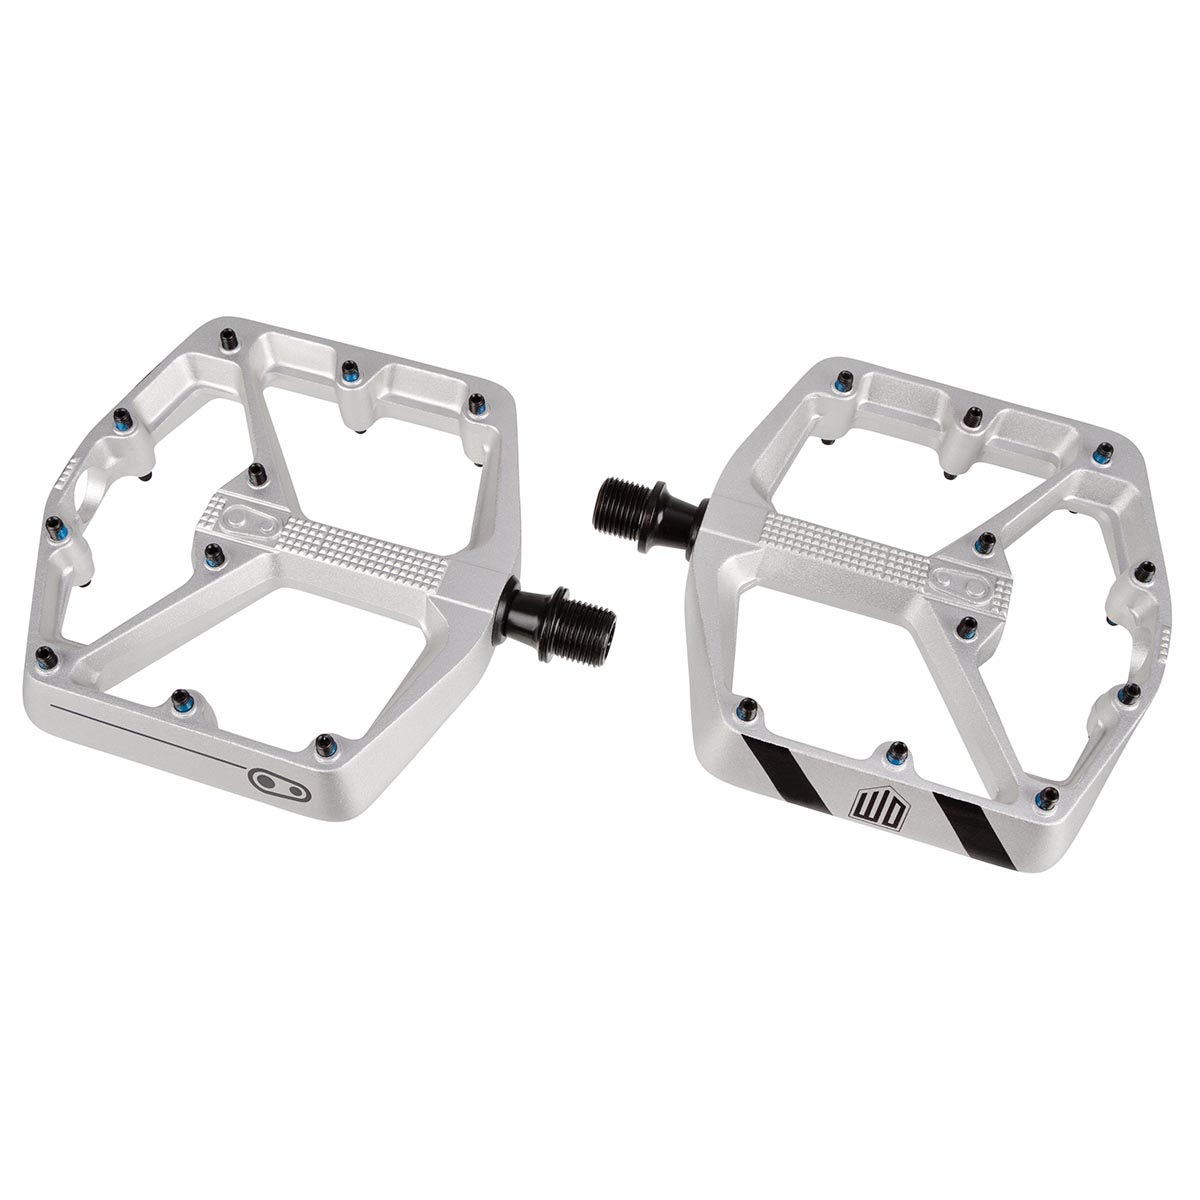 Crankbrothers Pedals Stamp 3 2019 Danny MacAskill Edition, Silver, Large